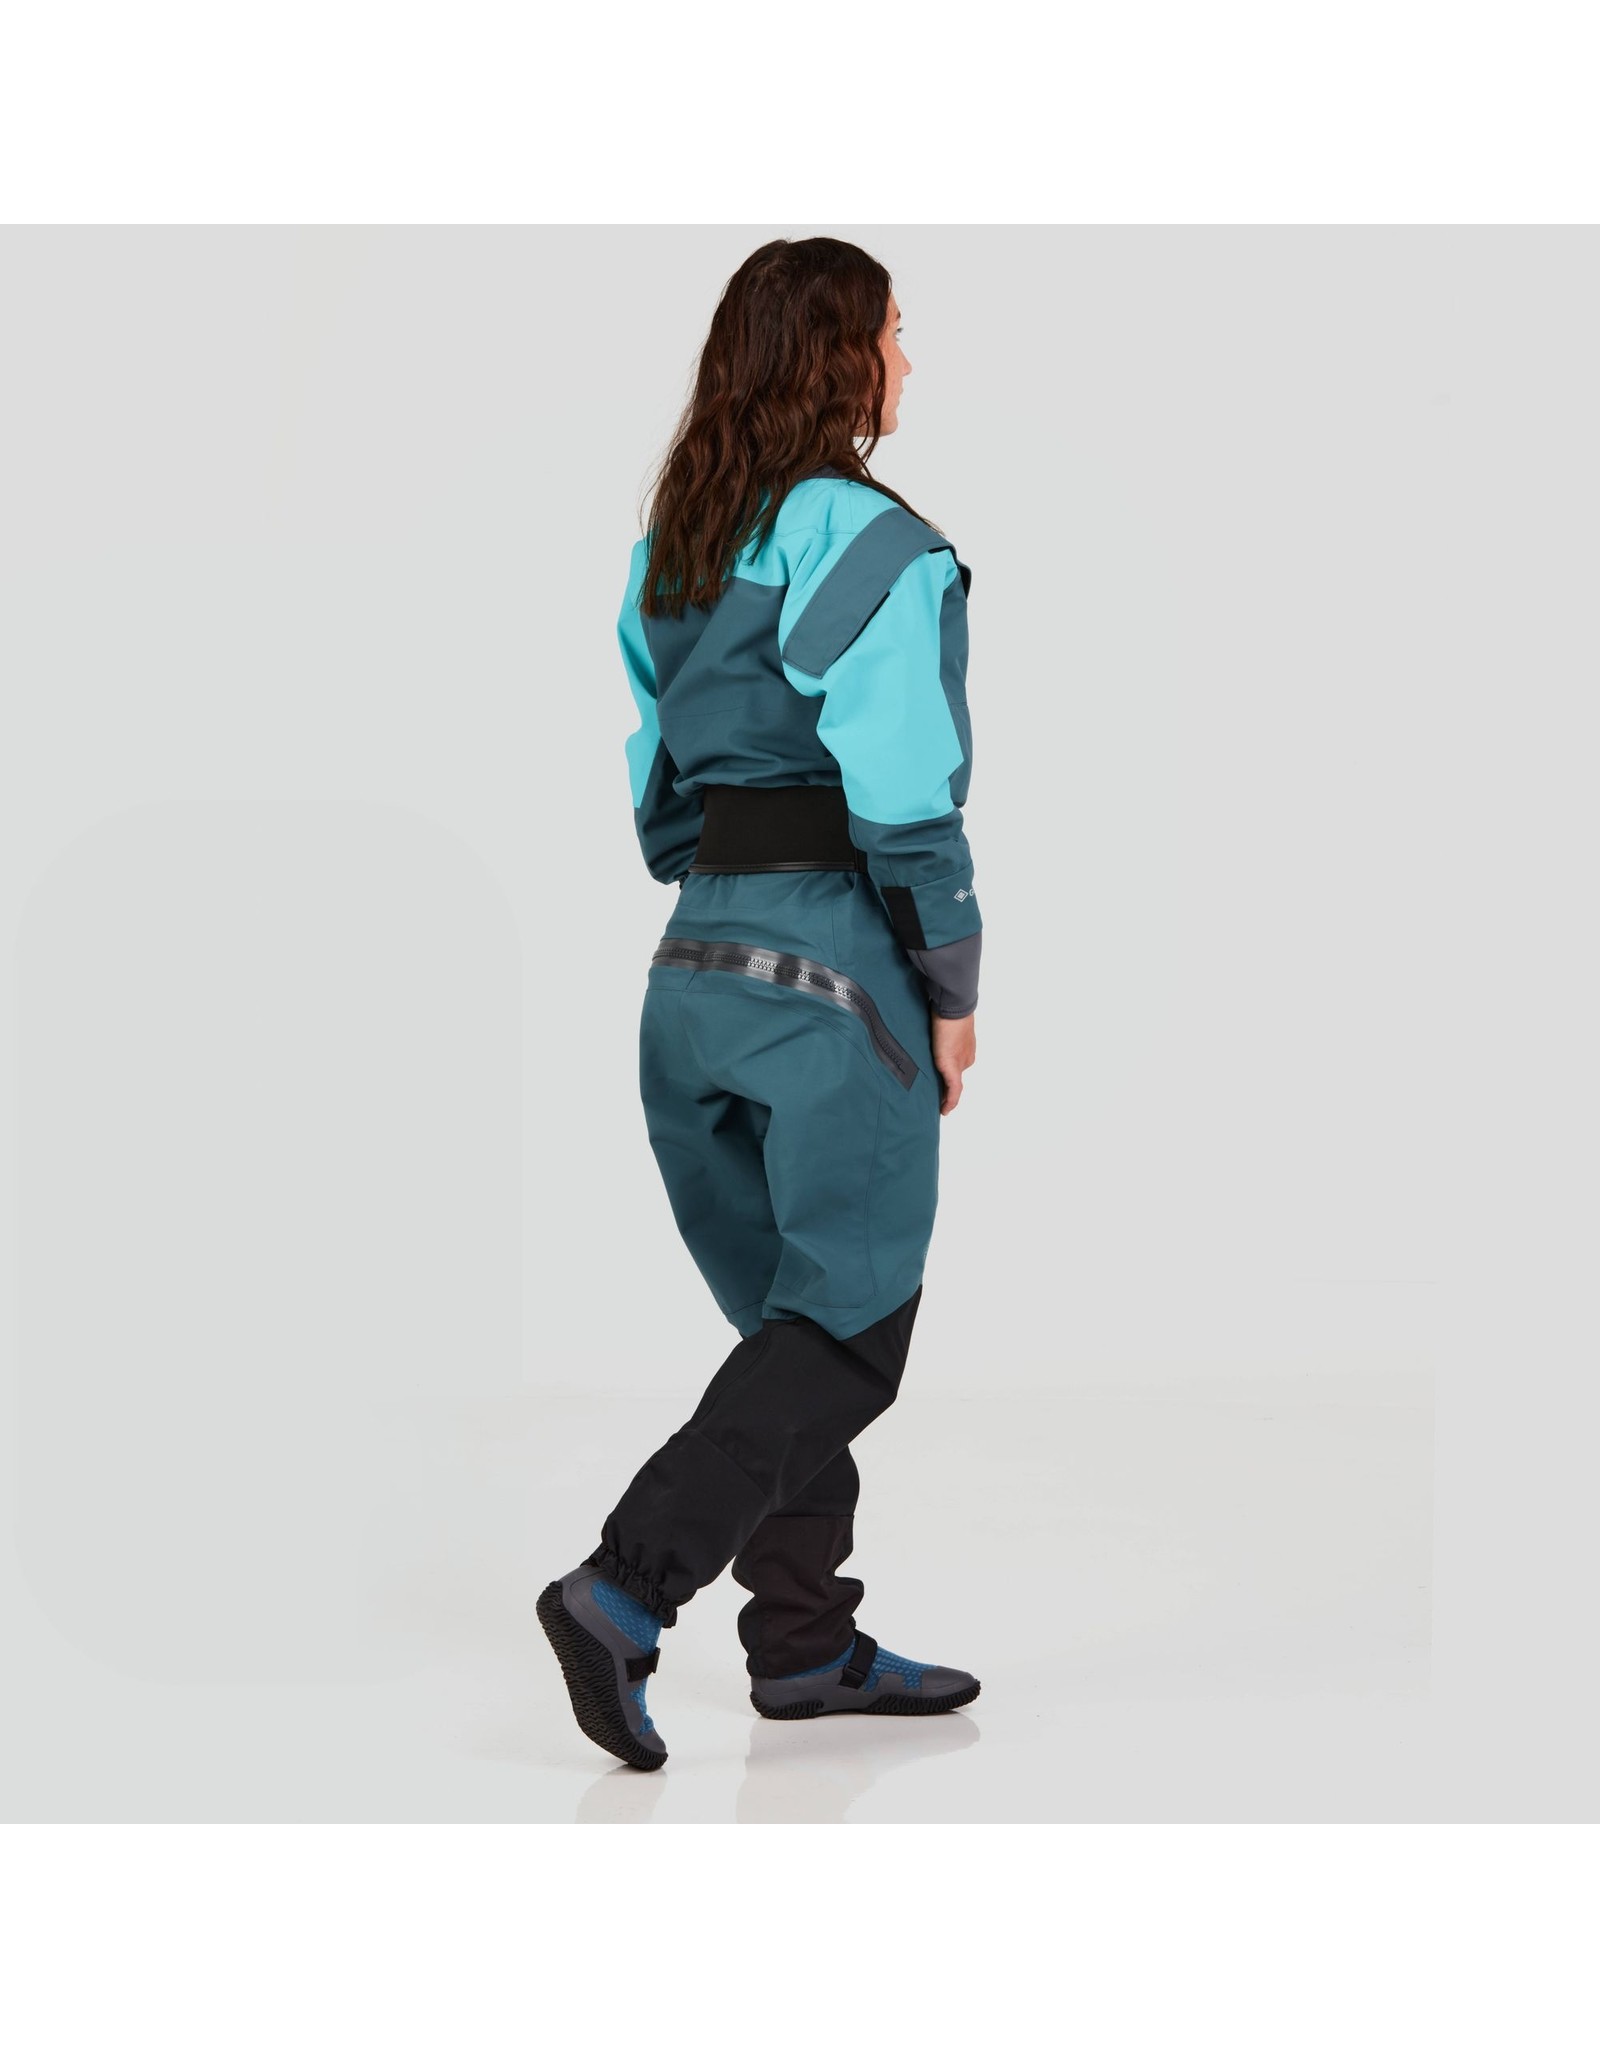 NRS NRS Women's Axiom Dry Suit